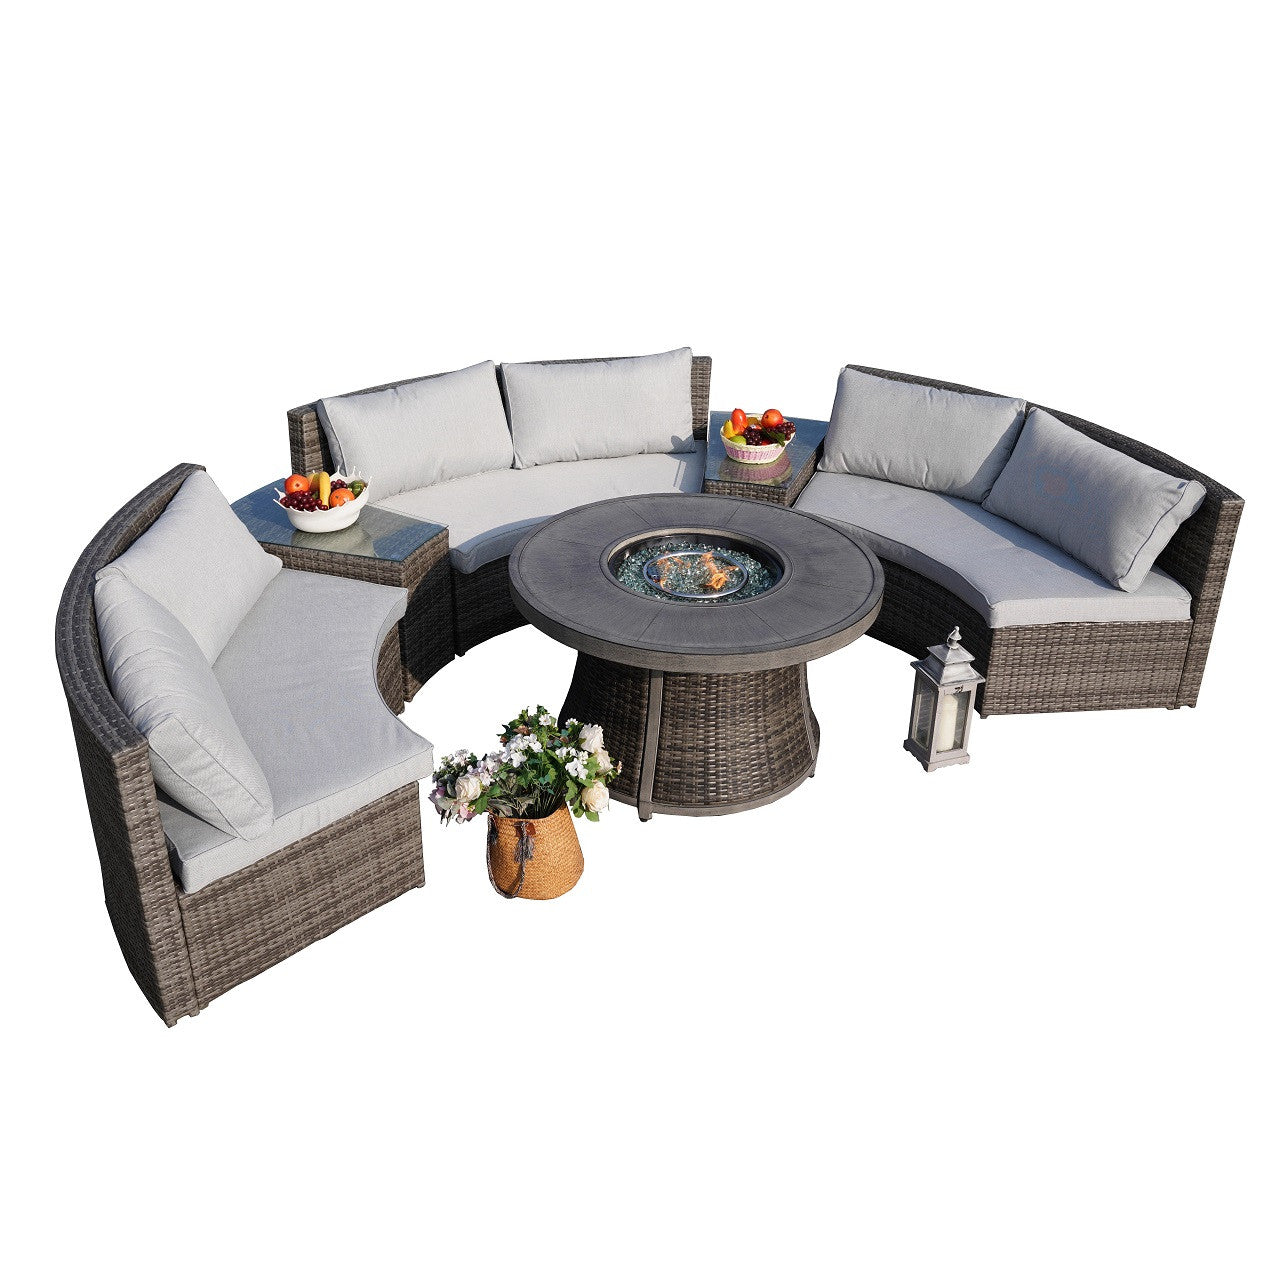 Direct Wicker Sectional Patio Gray Wicker Seating Set with Round Firepit Table